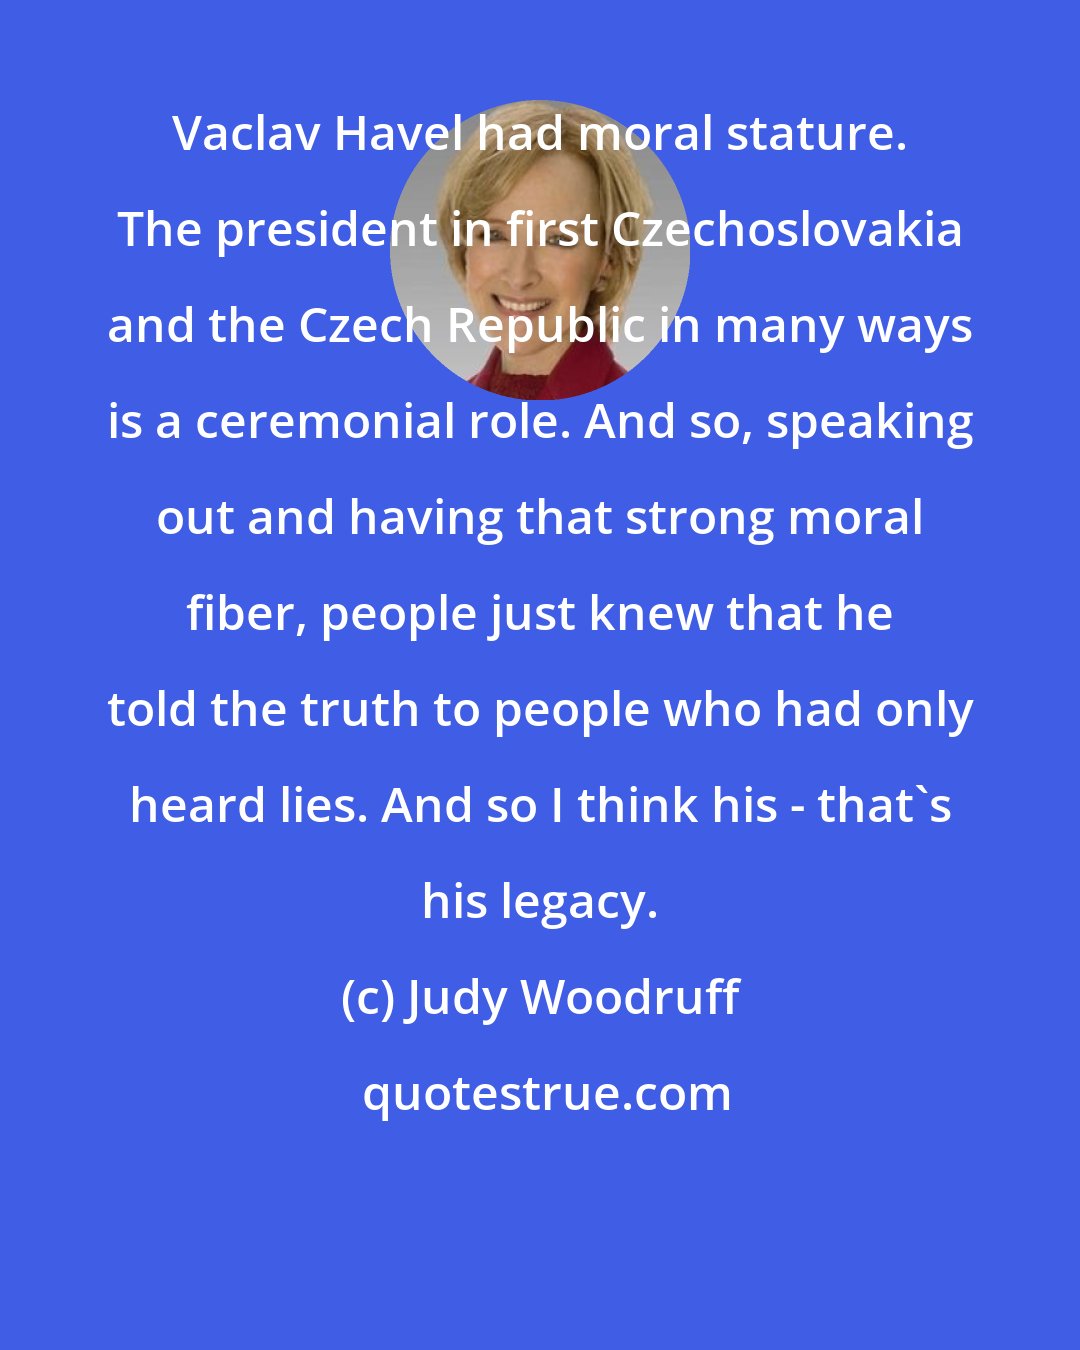 Judy Woodruff: Vaclav Havel had moral stature. The president in first Czechoslovakia and the Czech Republic in many ways is a ceremonial role. And so, speaking out and having that strong moral fiber, people just knew that he told the truth to people who had only heard lies. And so I think his - that's his legacy.